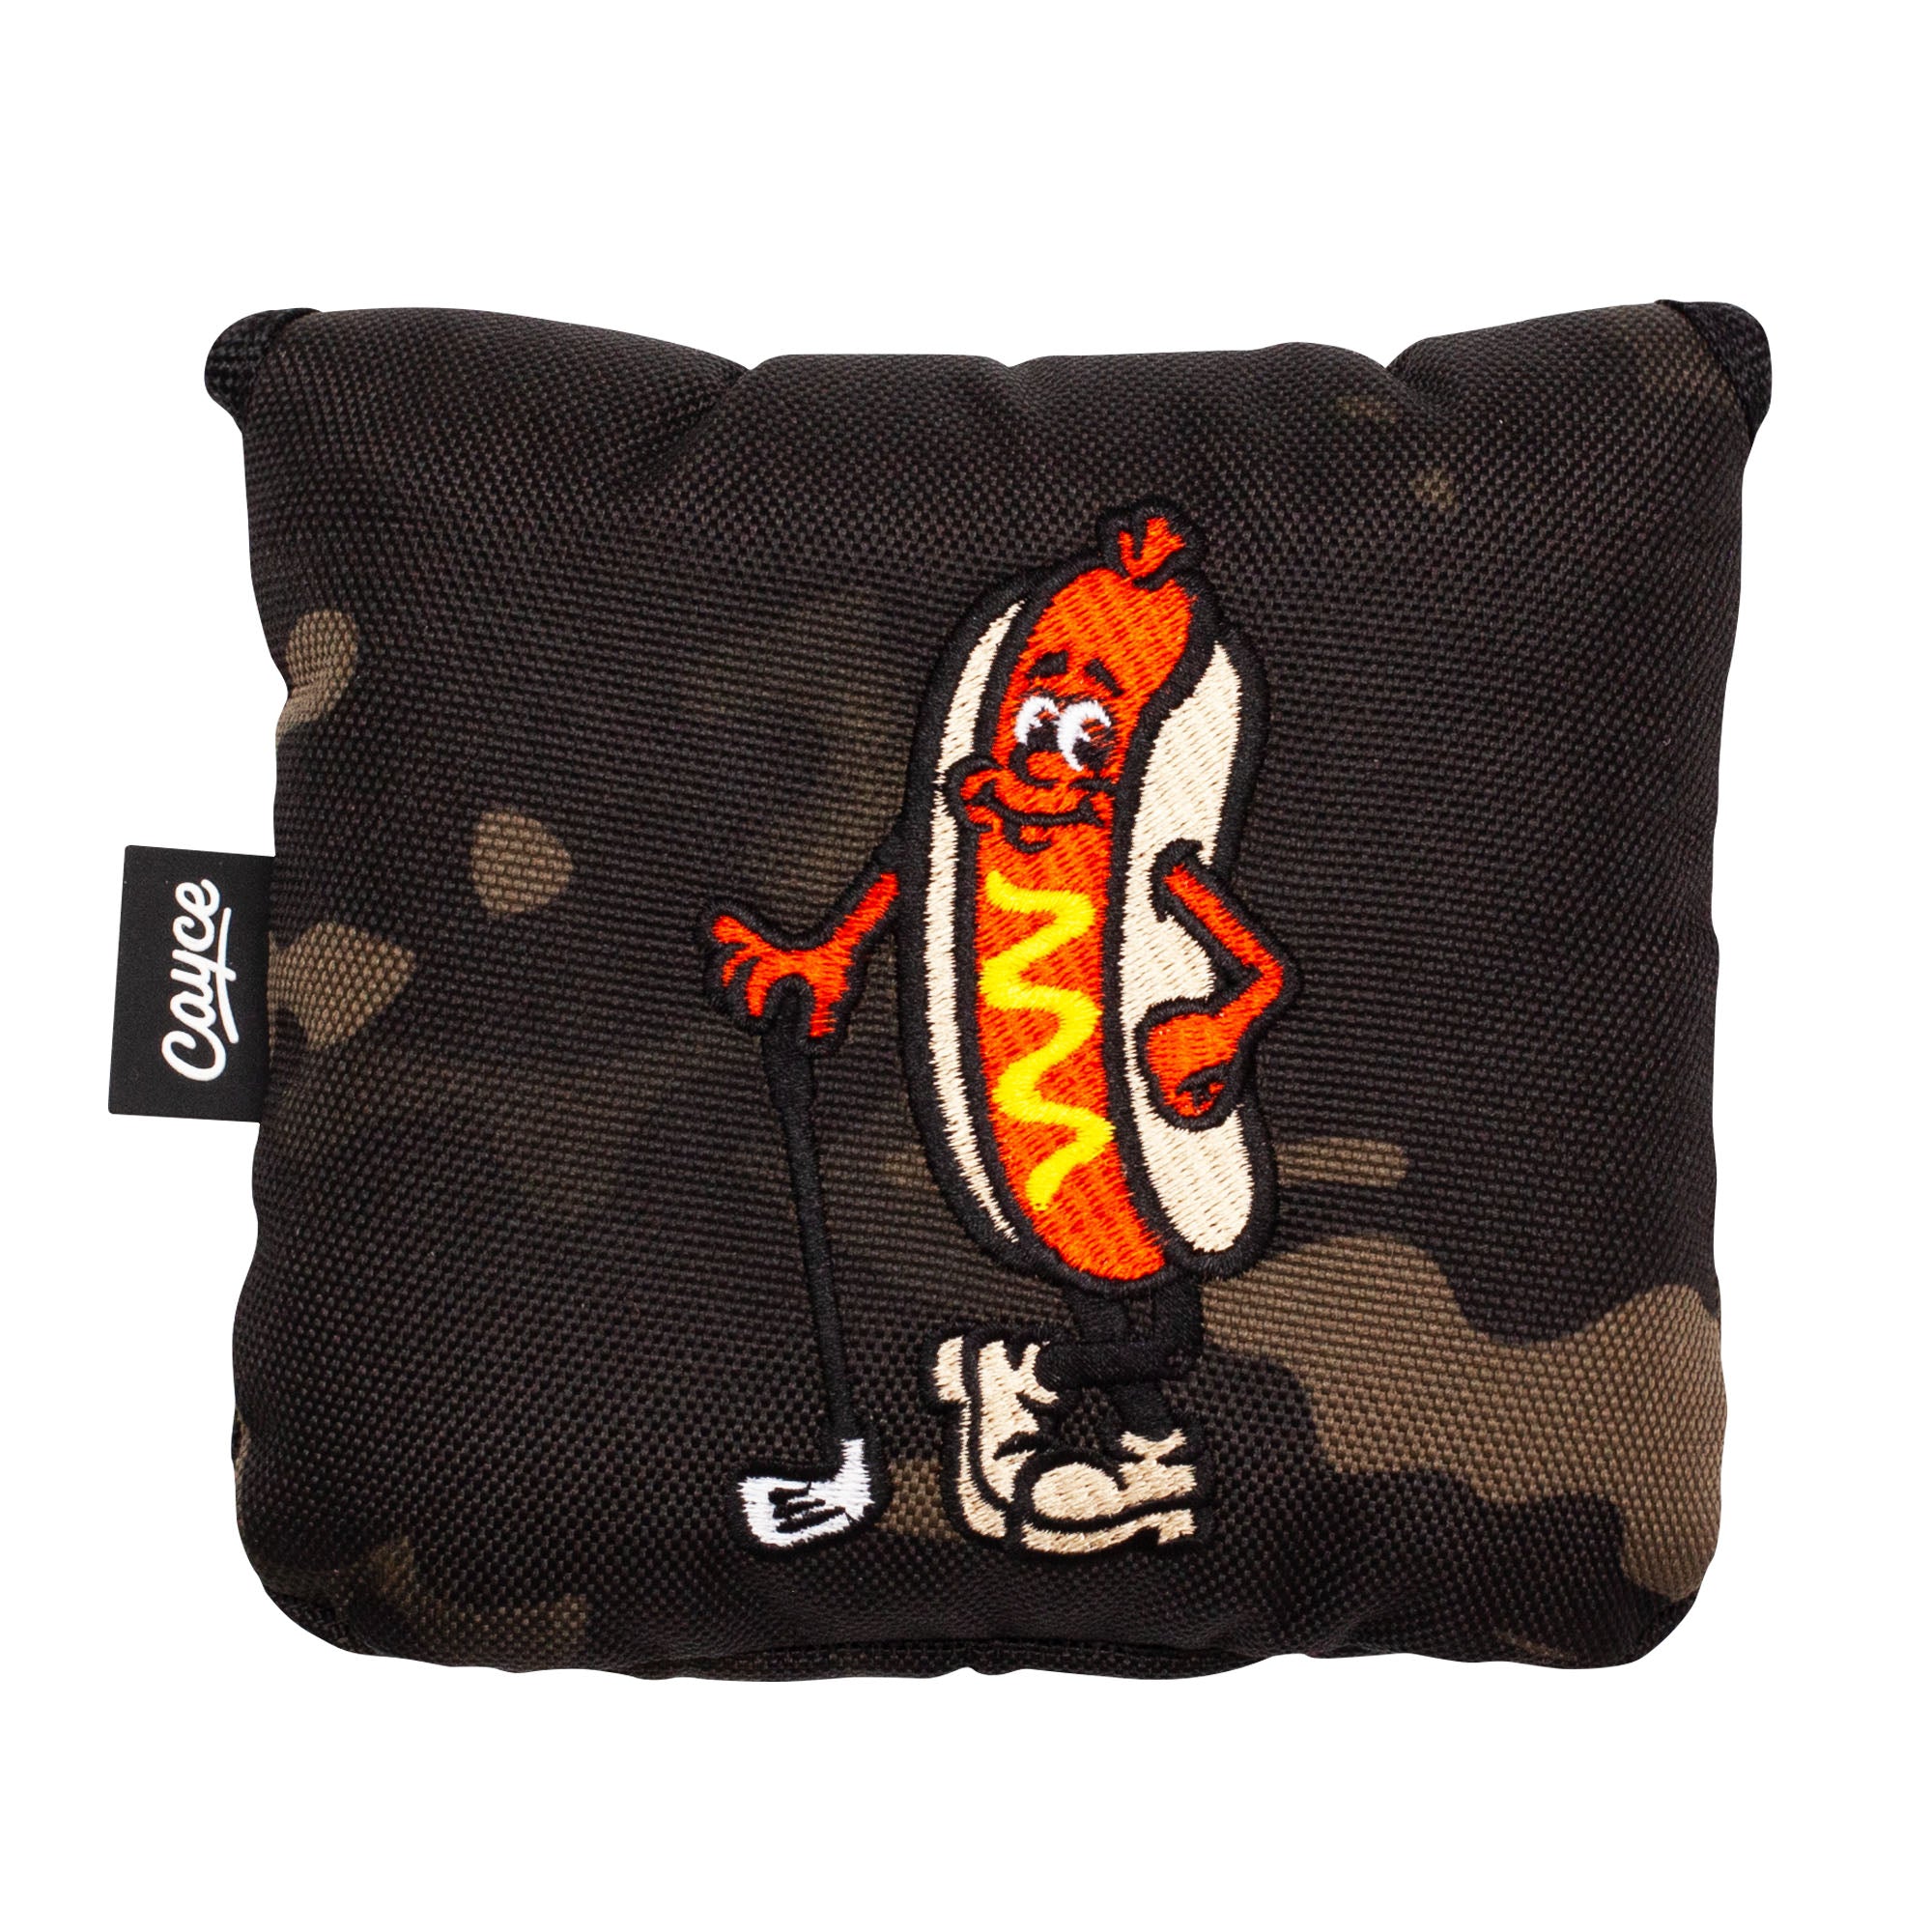 A camouflage, square, magnetic mallet putter headcover with embroidered hot dog golfer on the back.